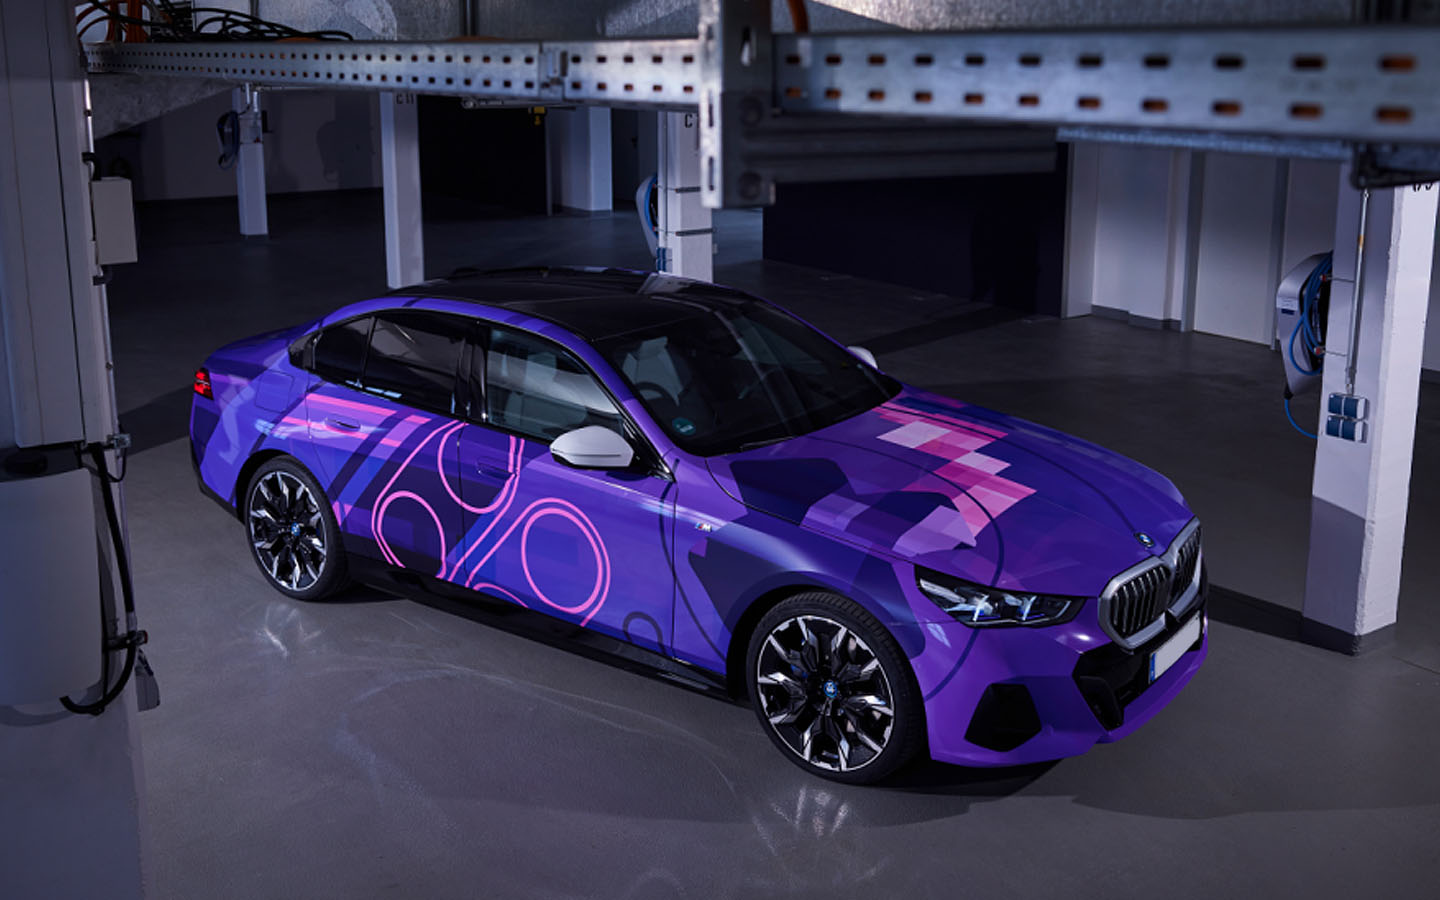 the bmw i5 reflects the colour scheme of the games available in the car